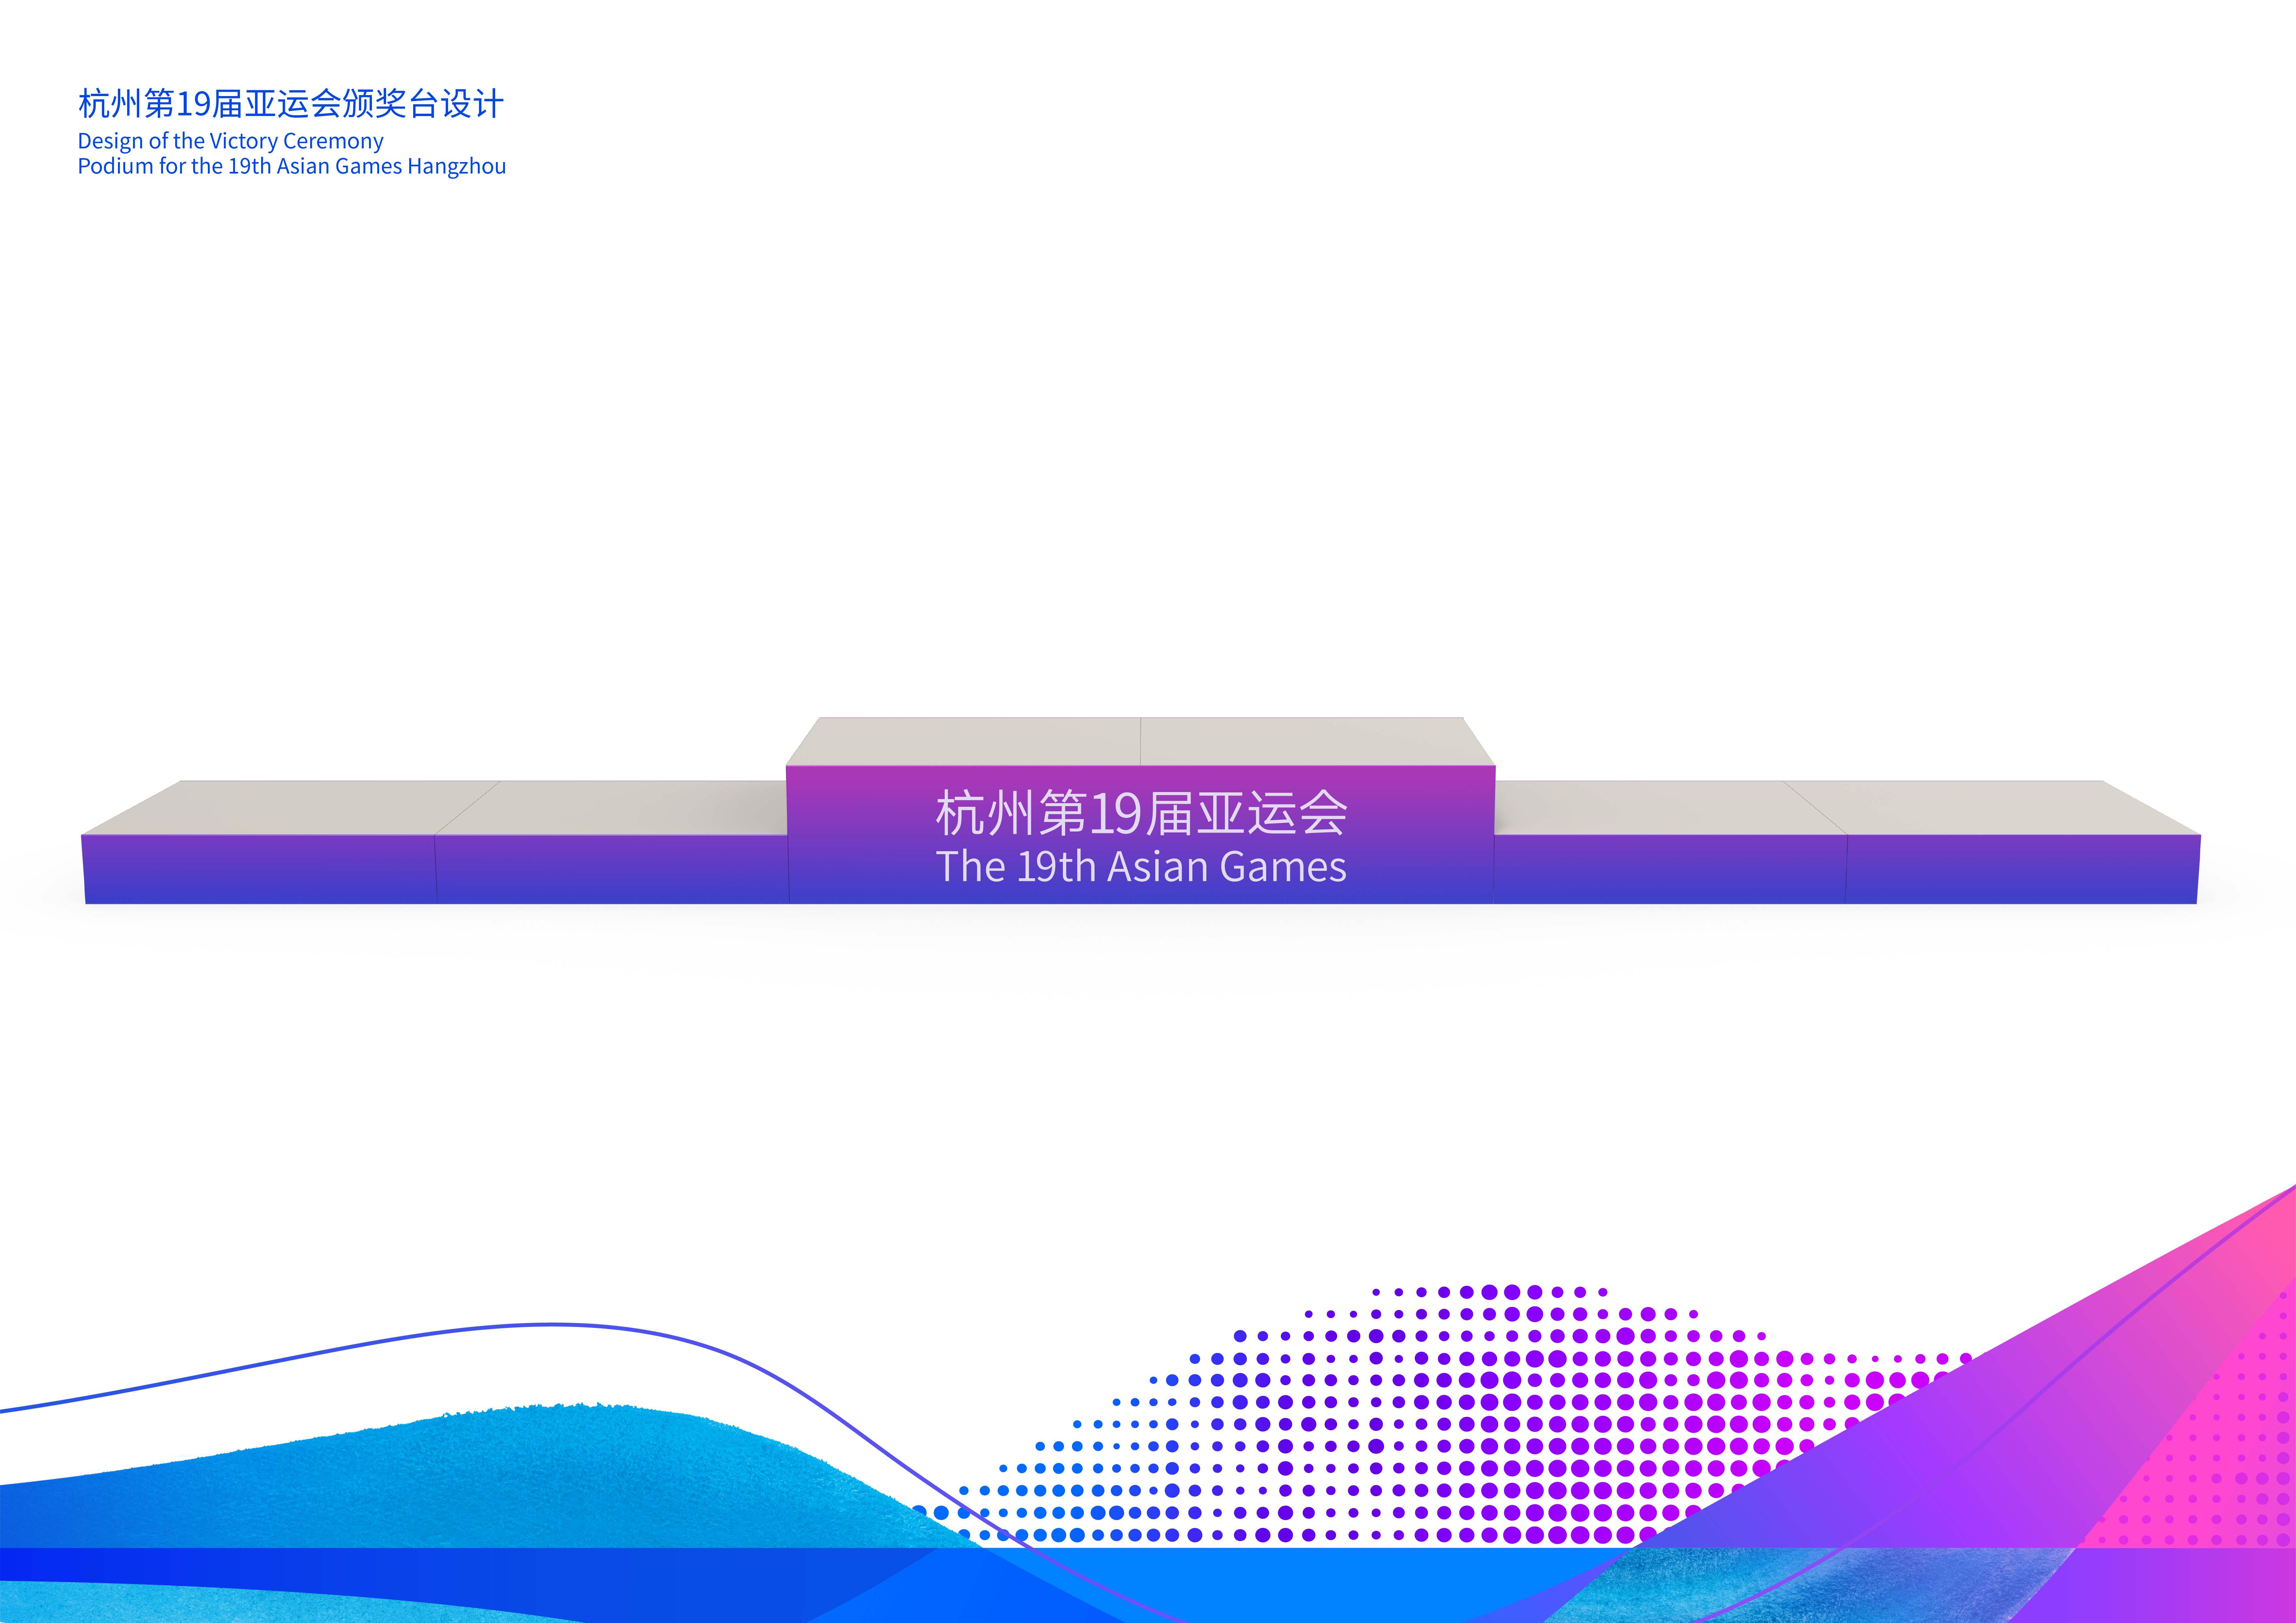 The design of the victory ceremony podium for the 19th Asian Games Hangzhou, Zhejiang Province.  /19th Asian Games Hangzhou